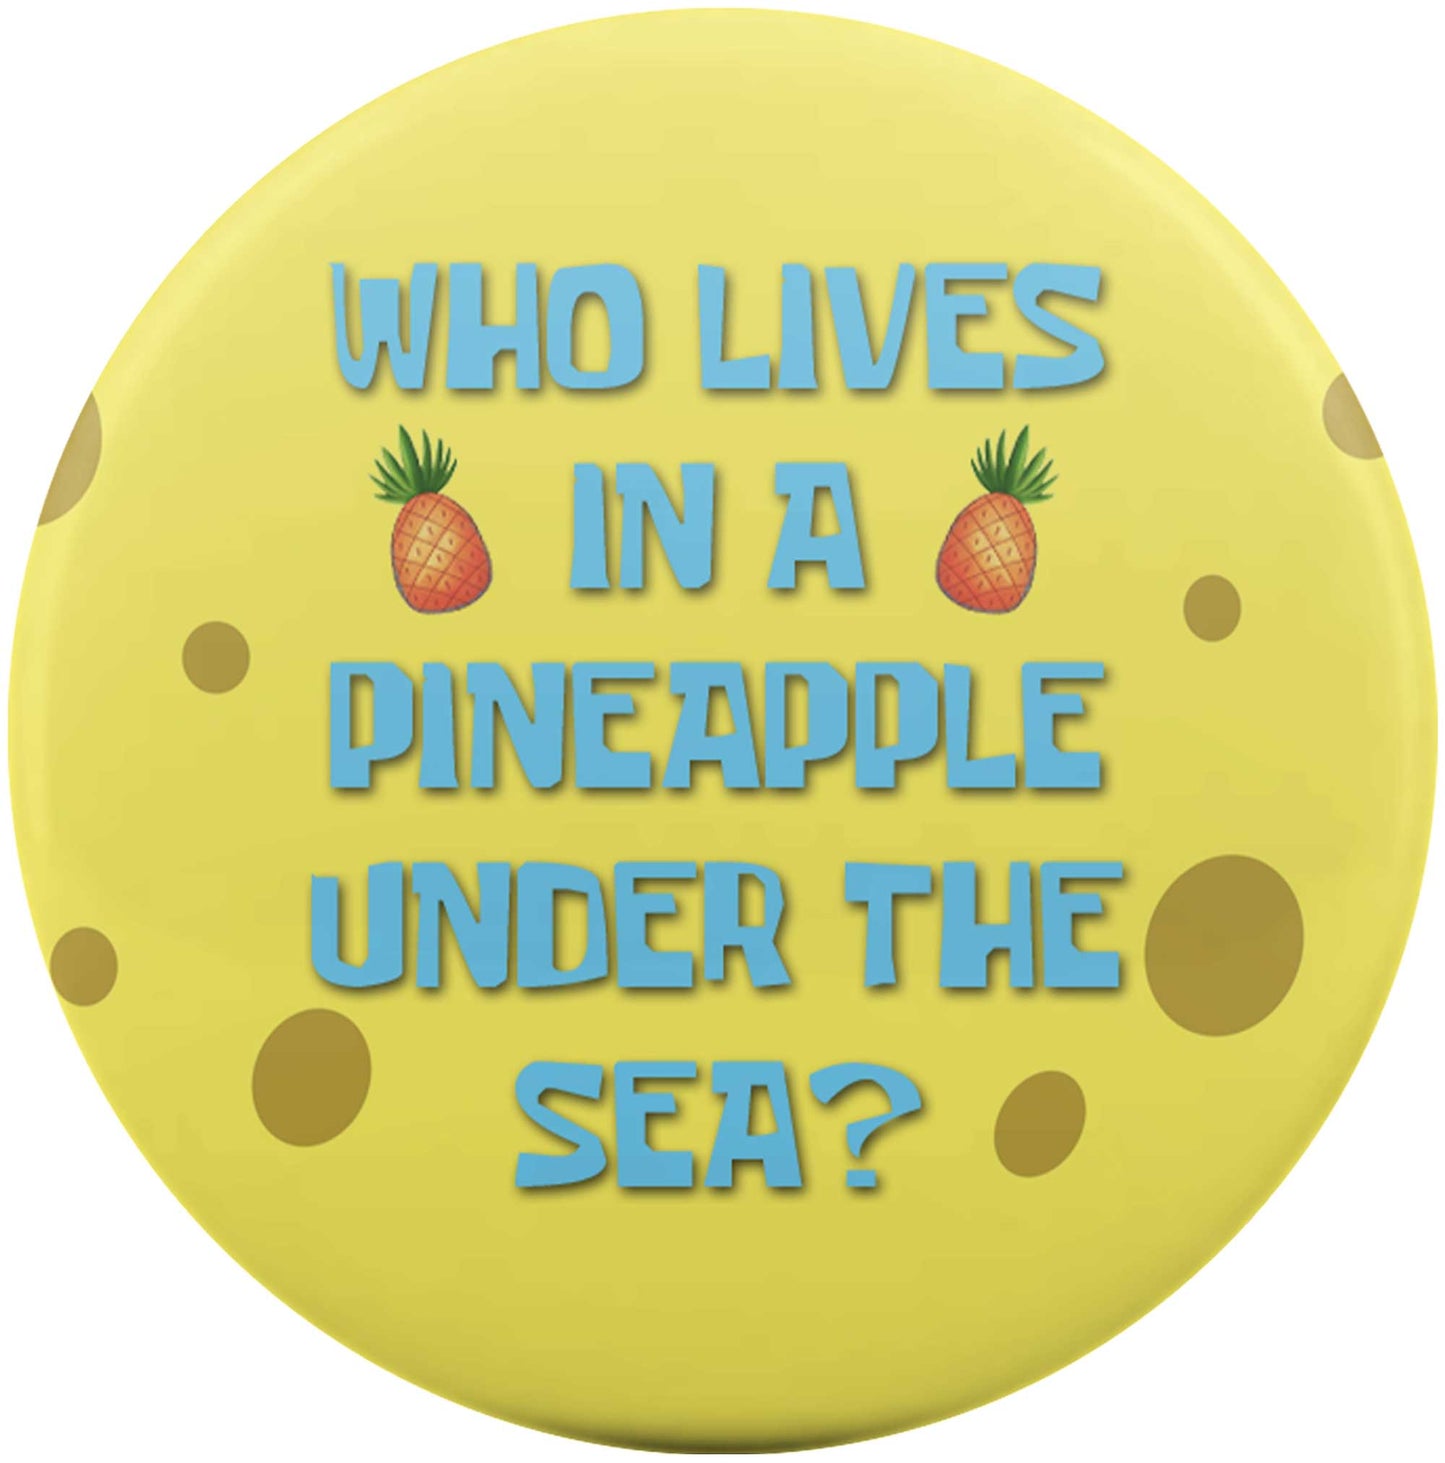 Who Lives In A Pineapple Under The Sea?